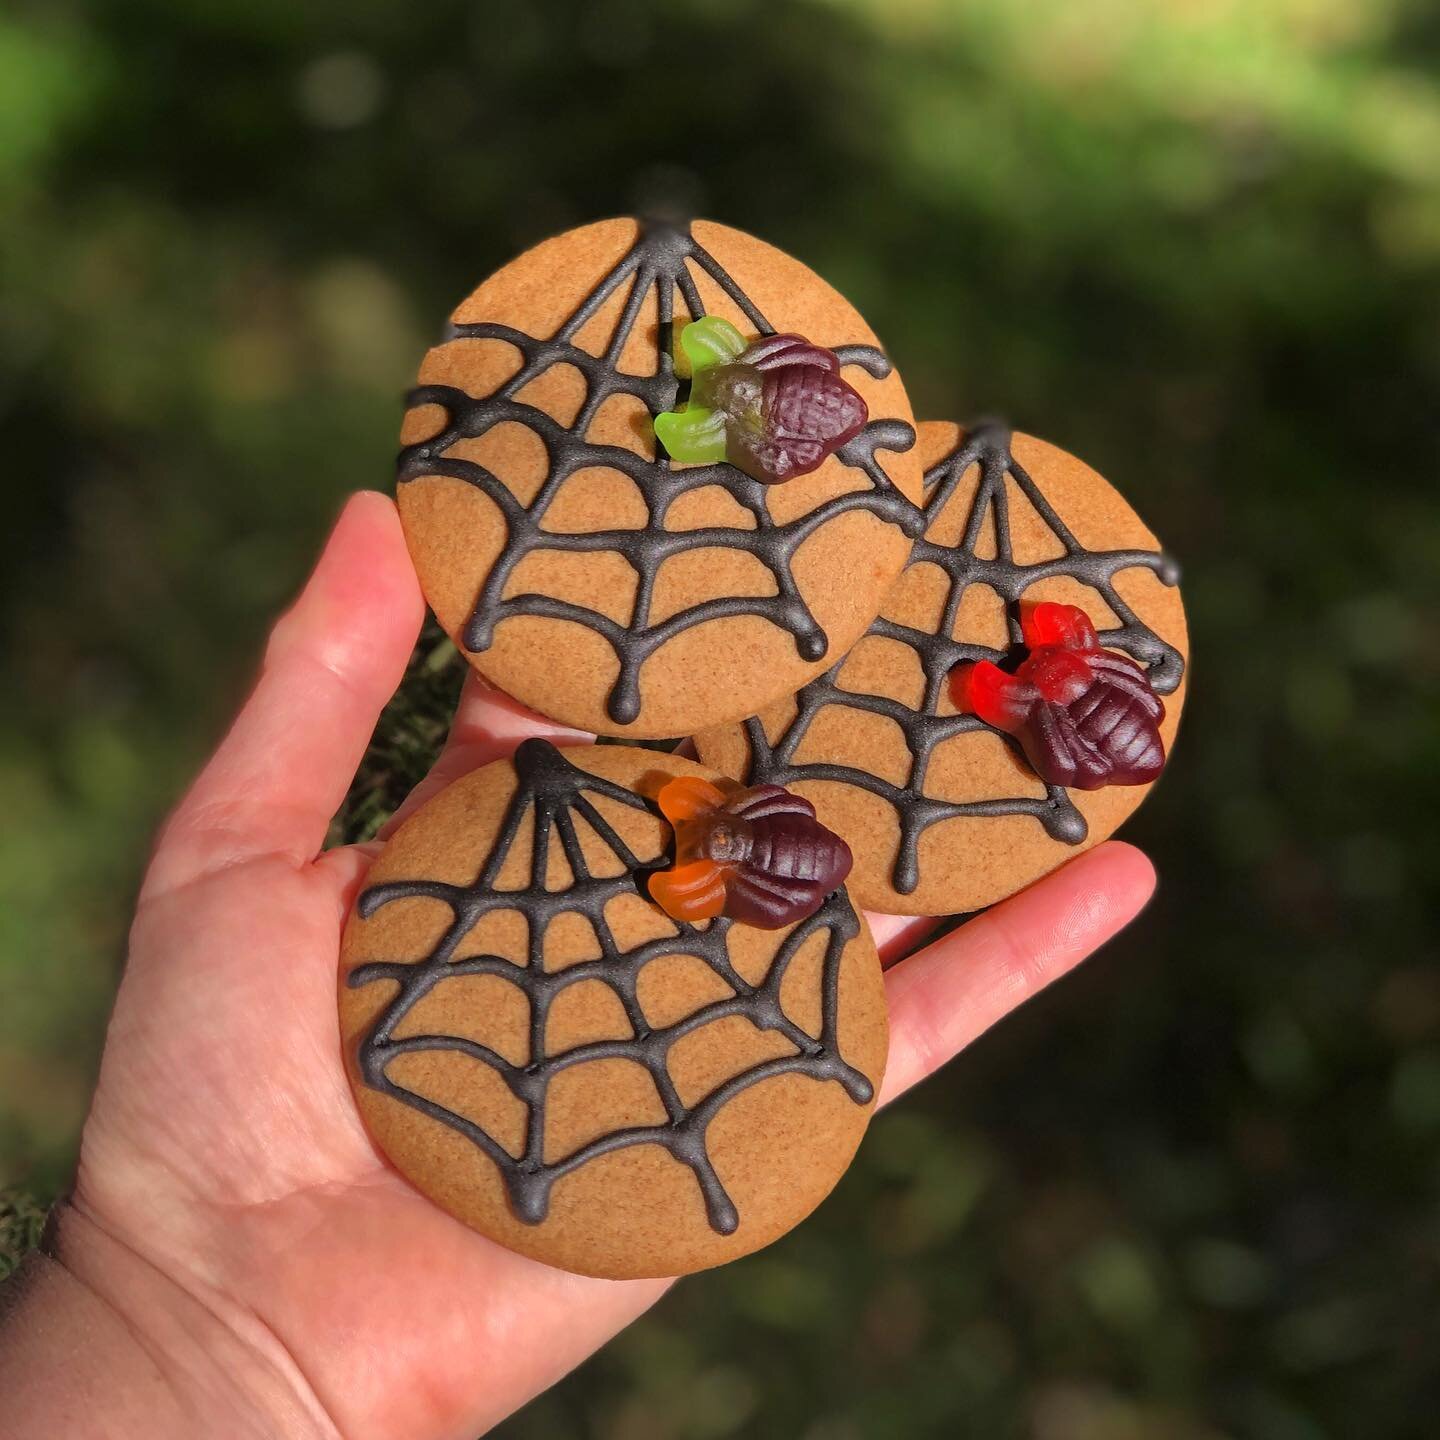 Incy Wincy.

Don&rsquo;t mess with a classic. 

Halloween cookies avail instore and to order - between now and next SUNDAY the 29th @cubbyhousecanteen 
🎃🎃🎃🎃🎃🕷️🕷️🕷️🕷️🕷️🕸️🕸️🏡🏡🏡🏡🏡❤️

#incywincy #spider #spiders #classic #cookies #hallow